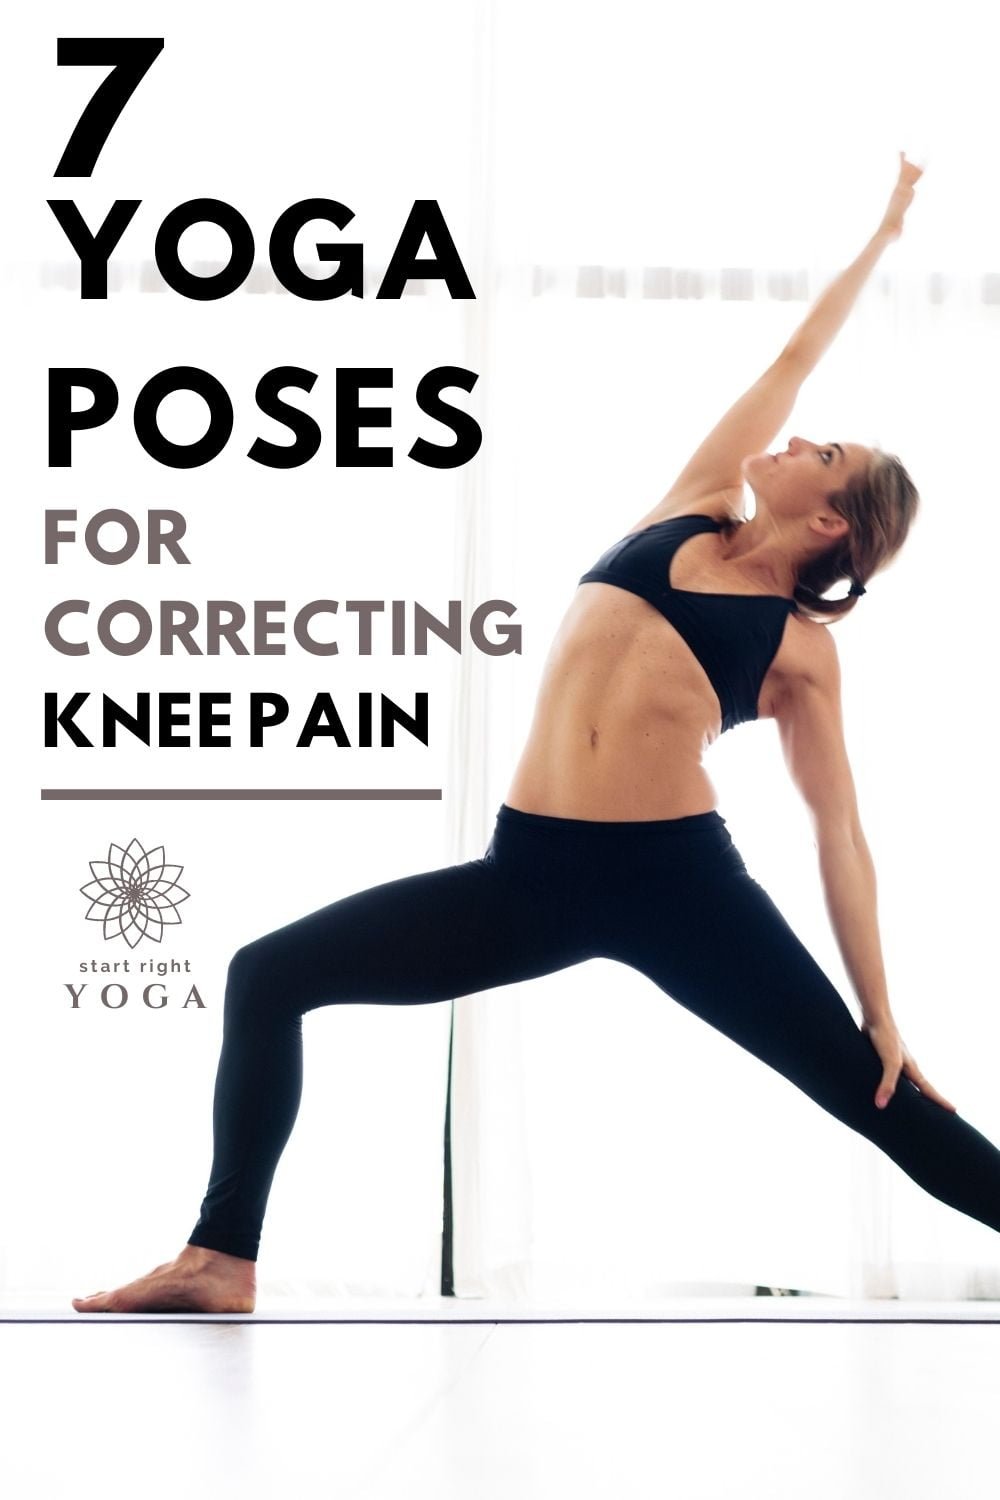 Yoga Modifications For Knee Pain | Props & Tips For Happy Joints - YouTube